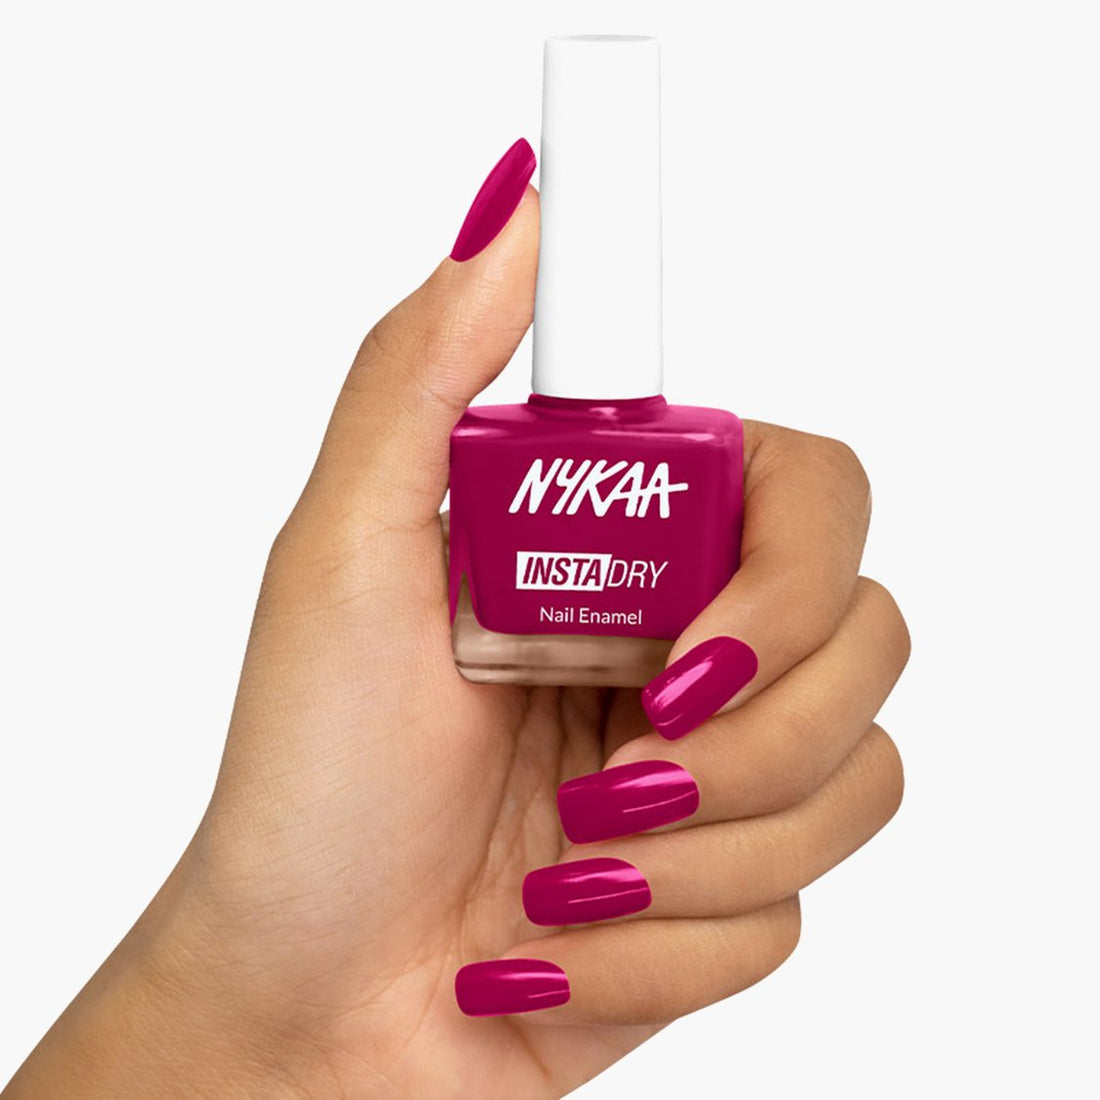 Buy Nykaa Nude Nail Enamel Collection Lavender Buttercream (Shade No. 54)  Online at Low Prices in India - Amazon.in